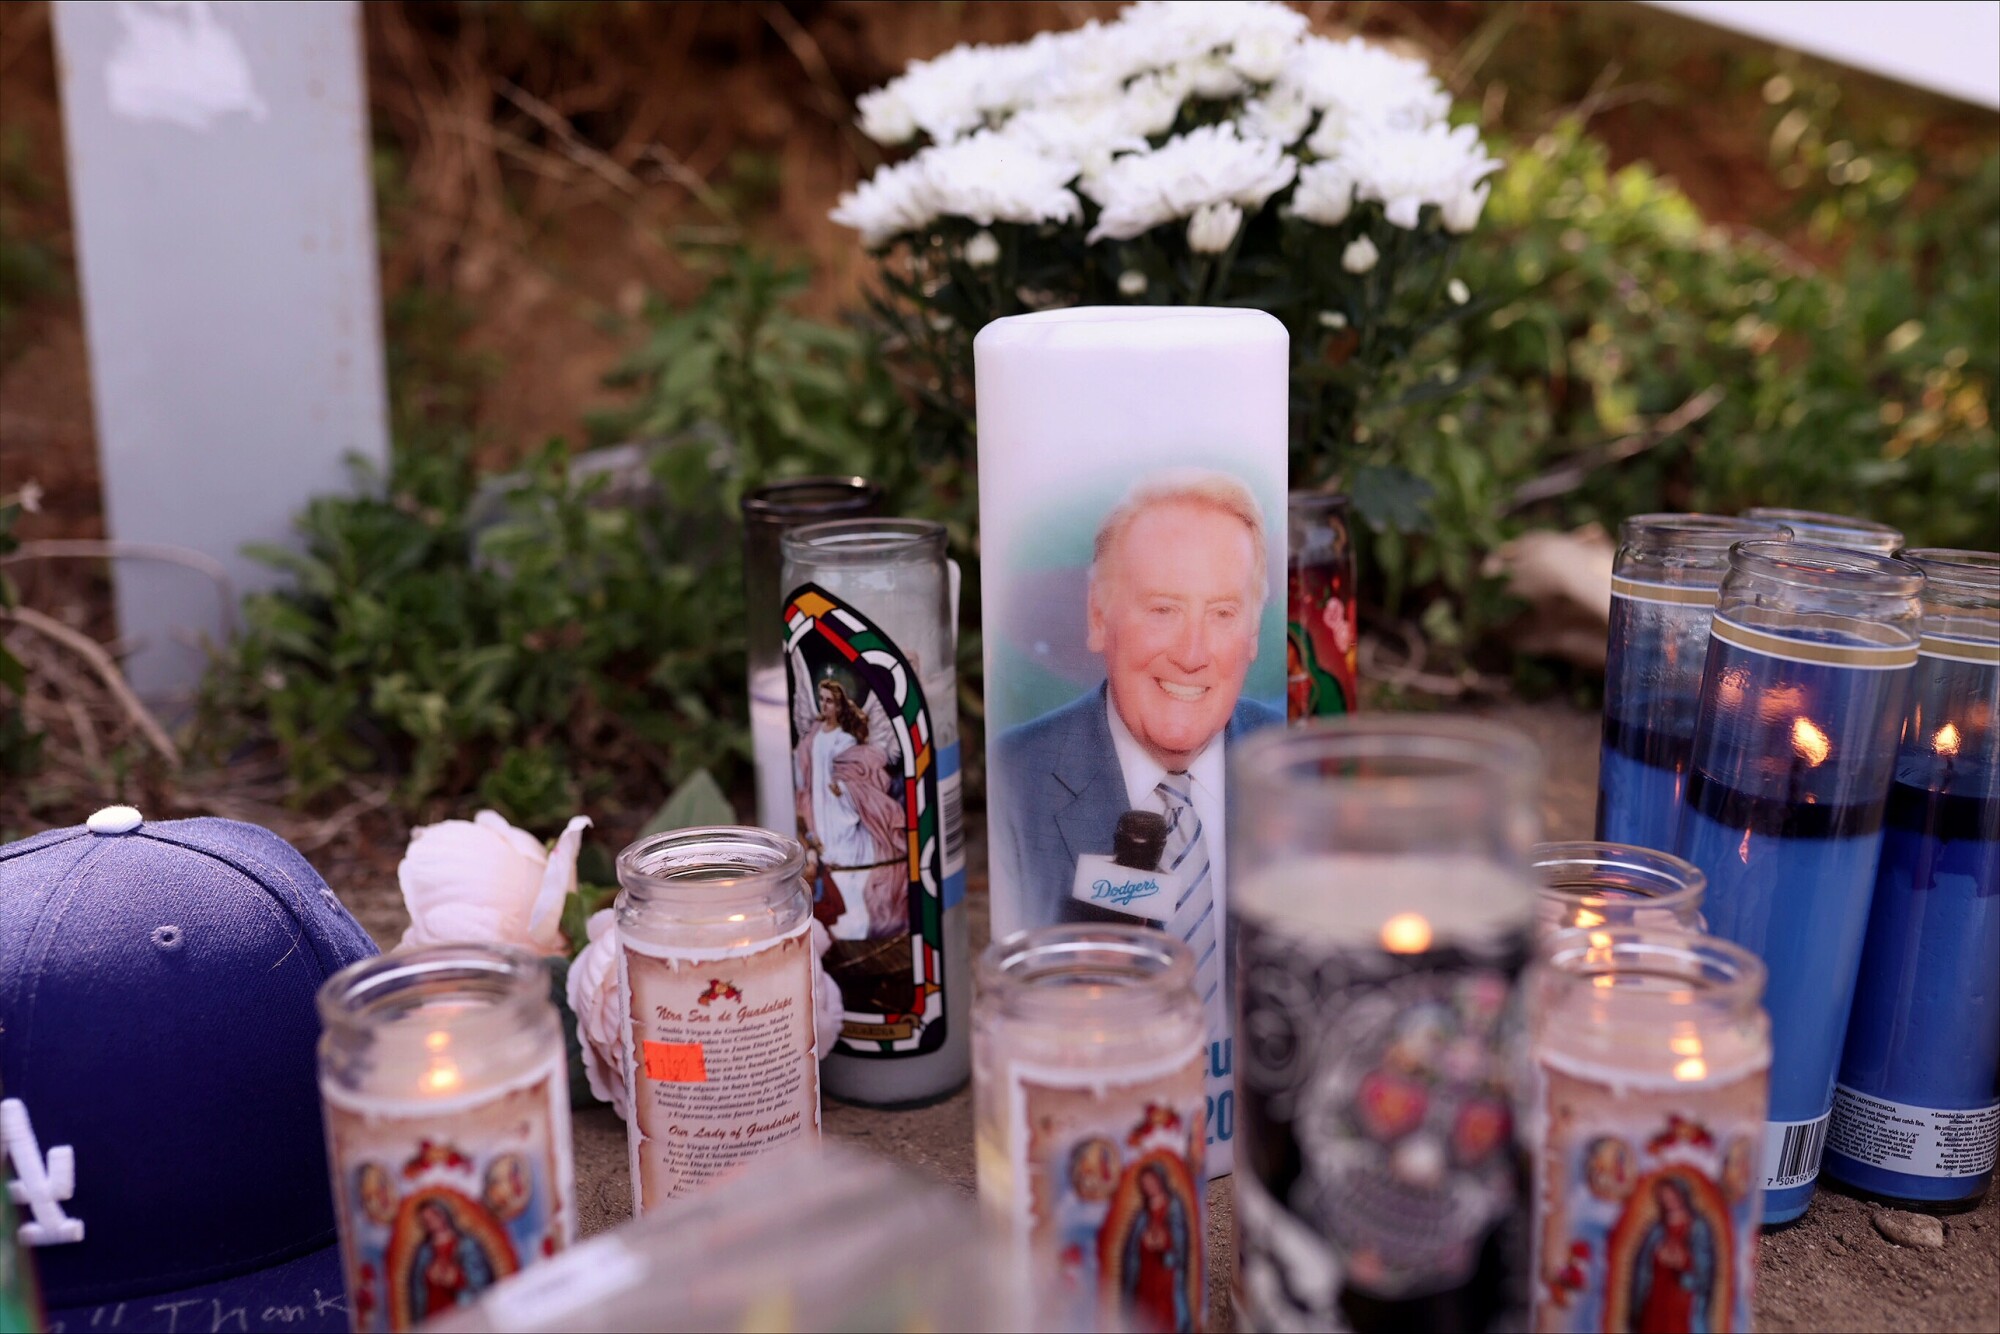 Candles burn at a growing memorial outside Dodger Stadium for legendary Los Angeles Dodgers broadcaster Vin Scully.